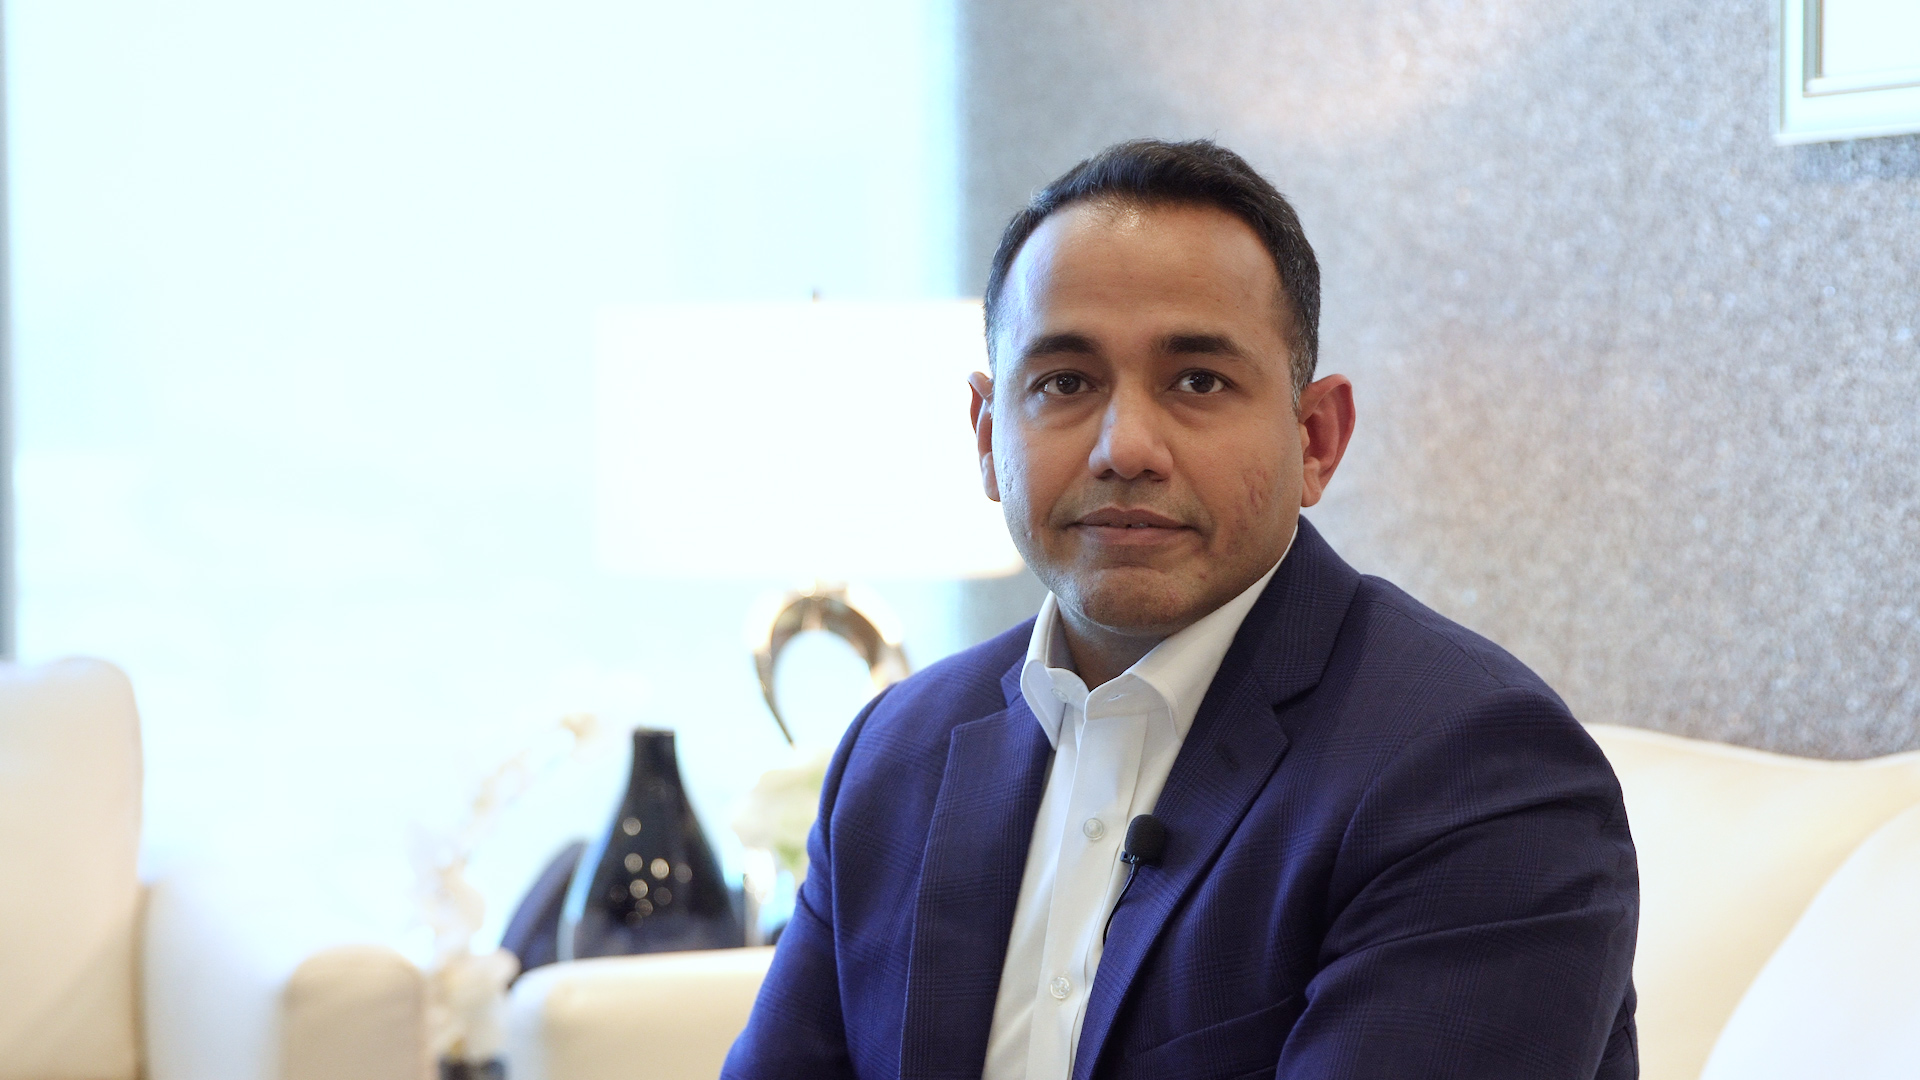 About MIR Digital Solutions: Interview with the Founder and CEO Mohammed Ali